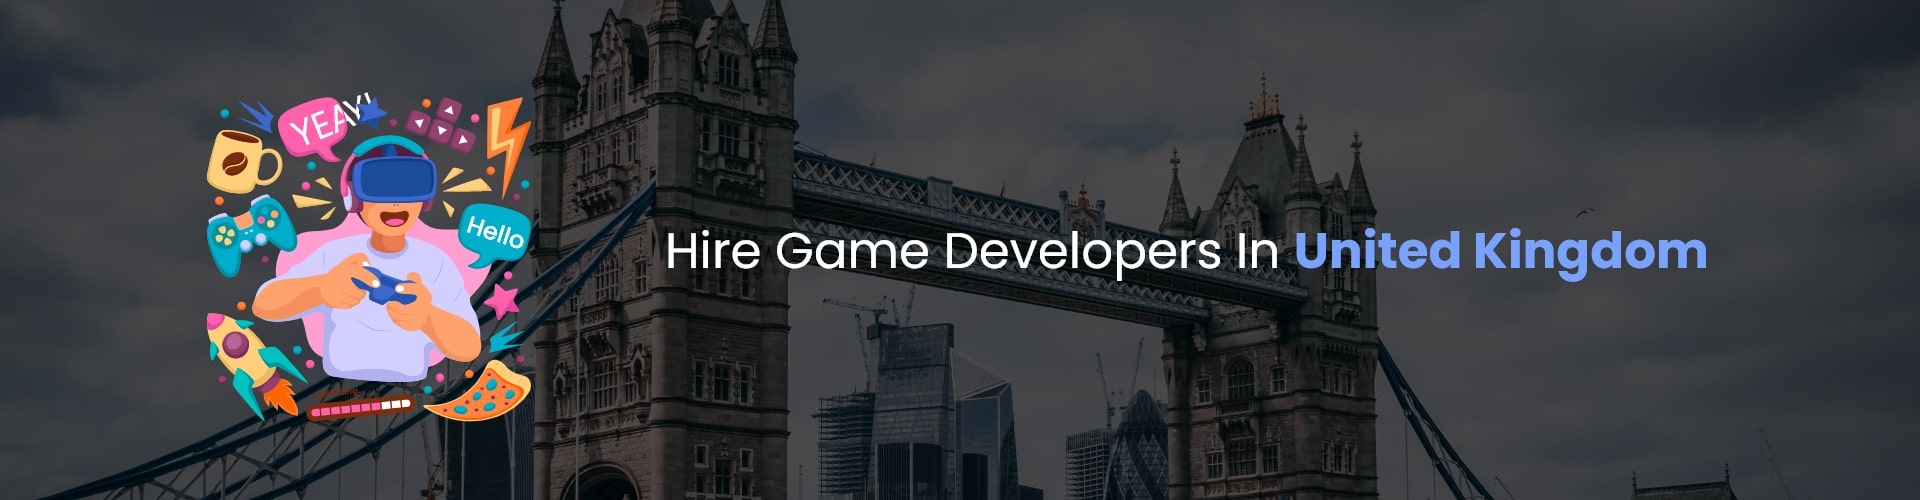 hire game developers in united kingdom